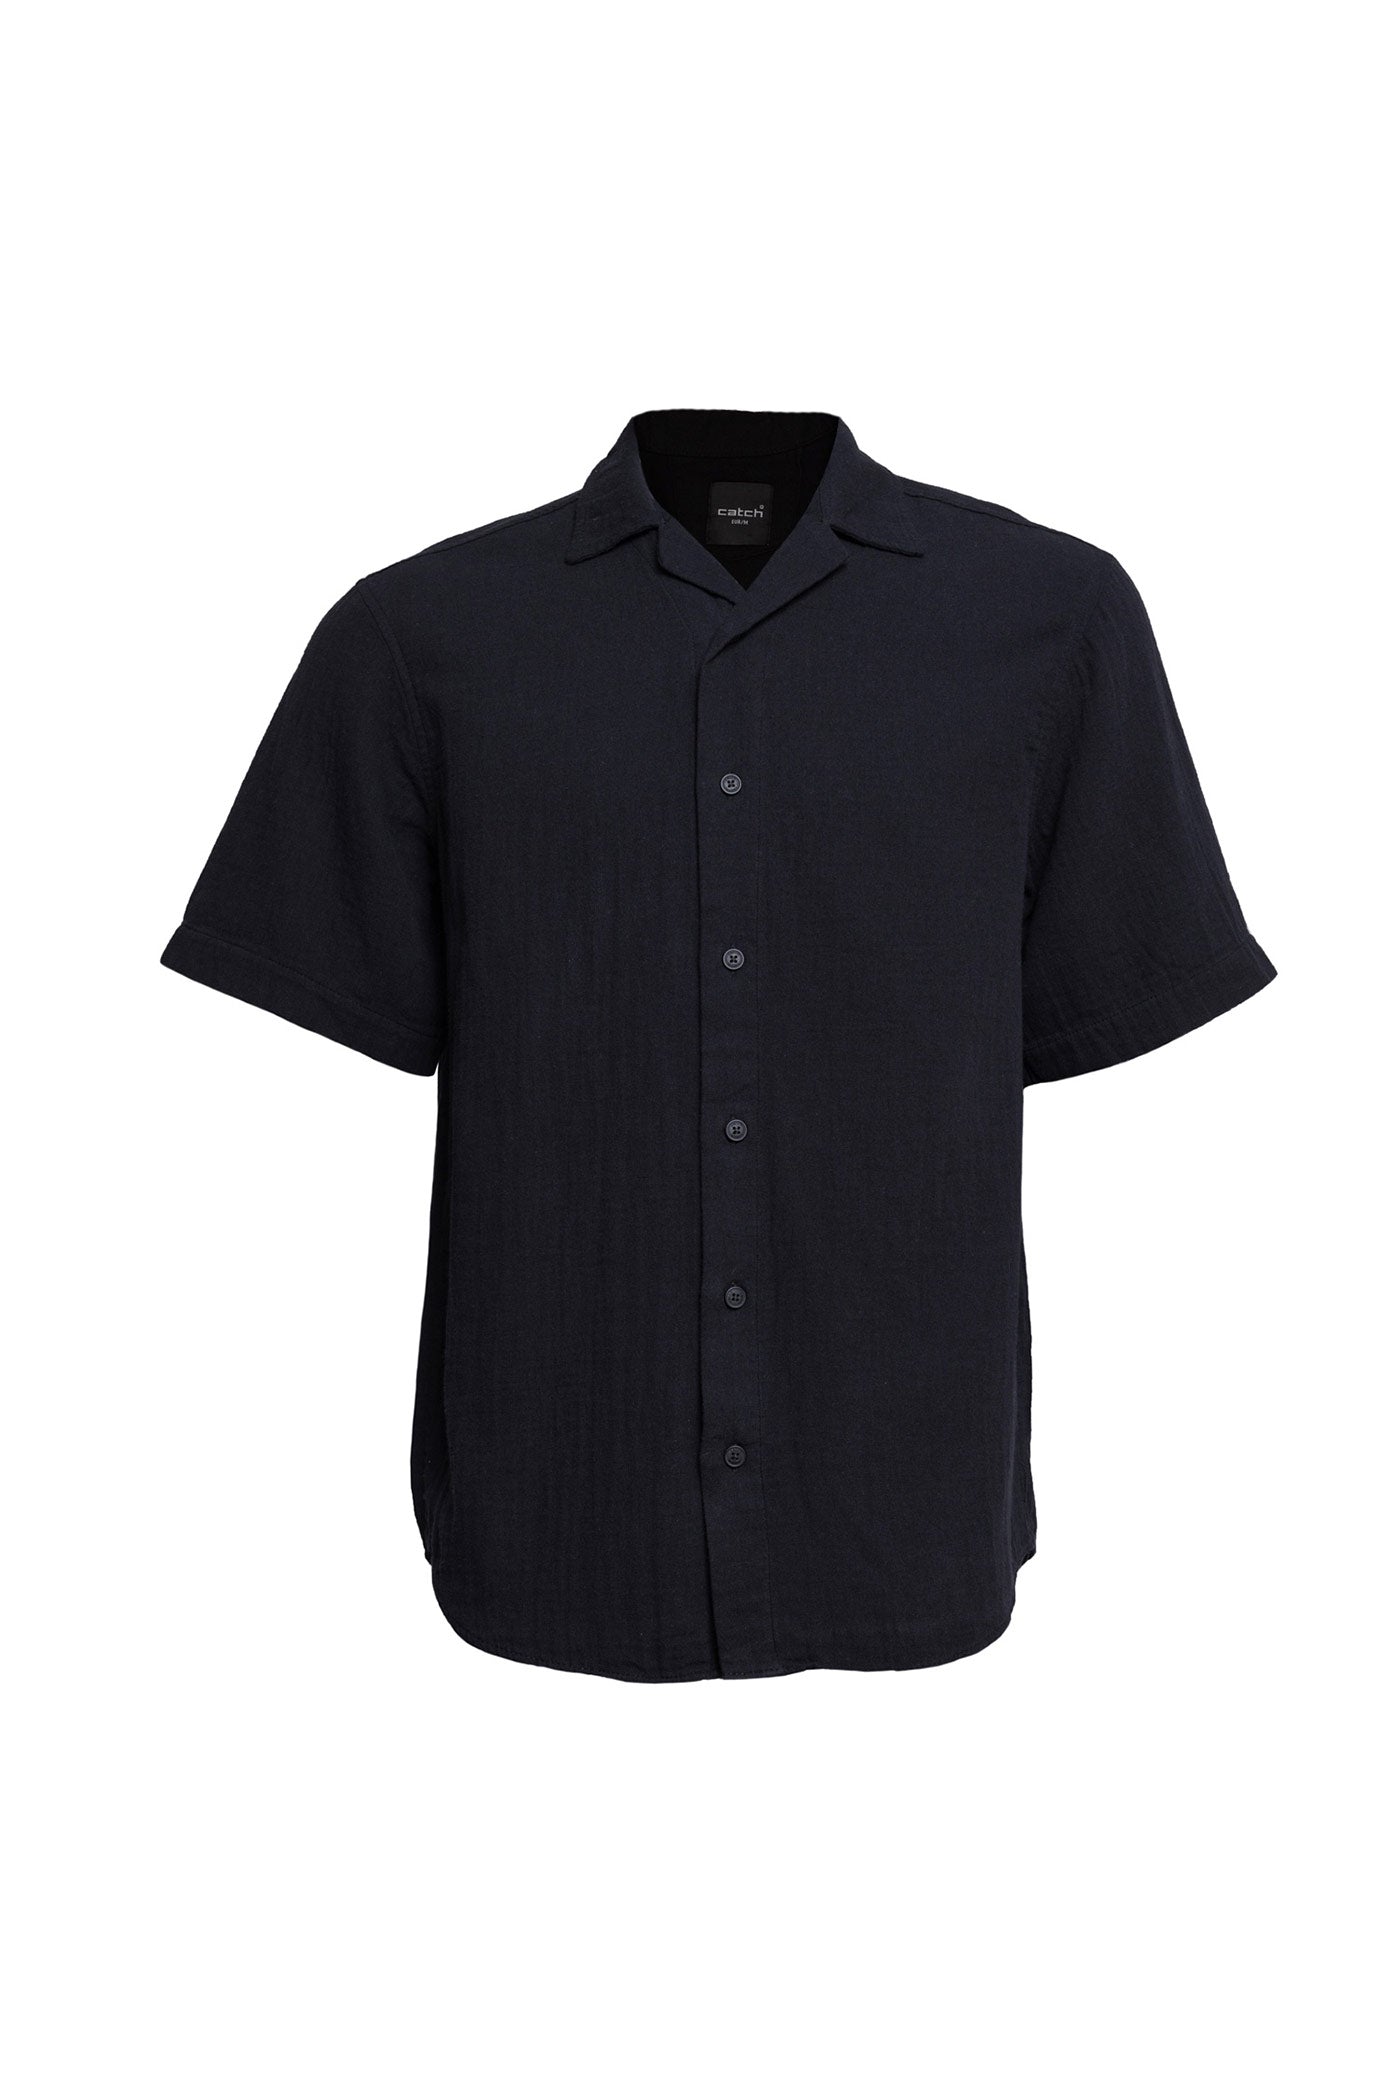 IN THE MIDDLE Short Sleeve Linen Shirt in Black